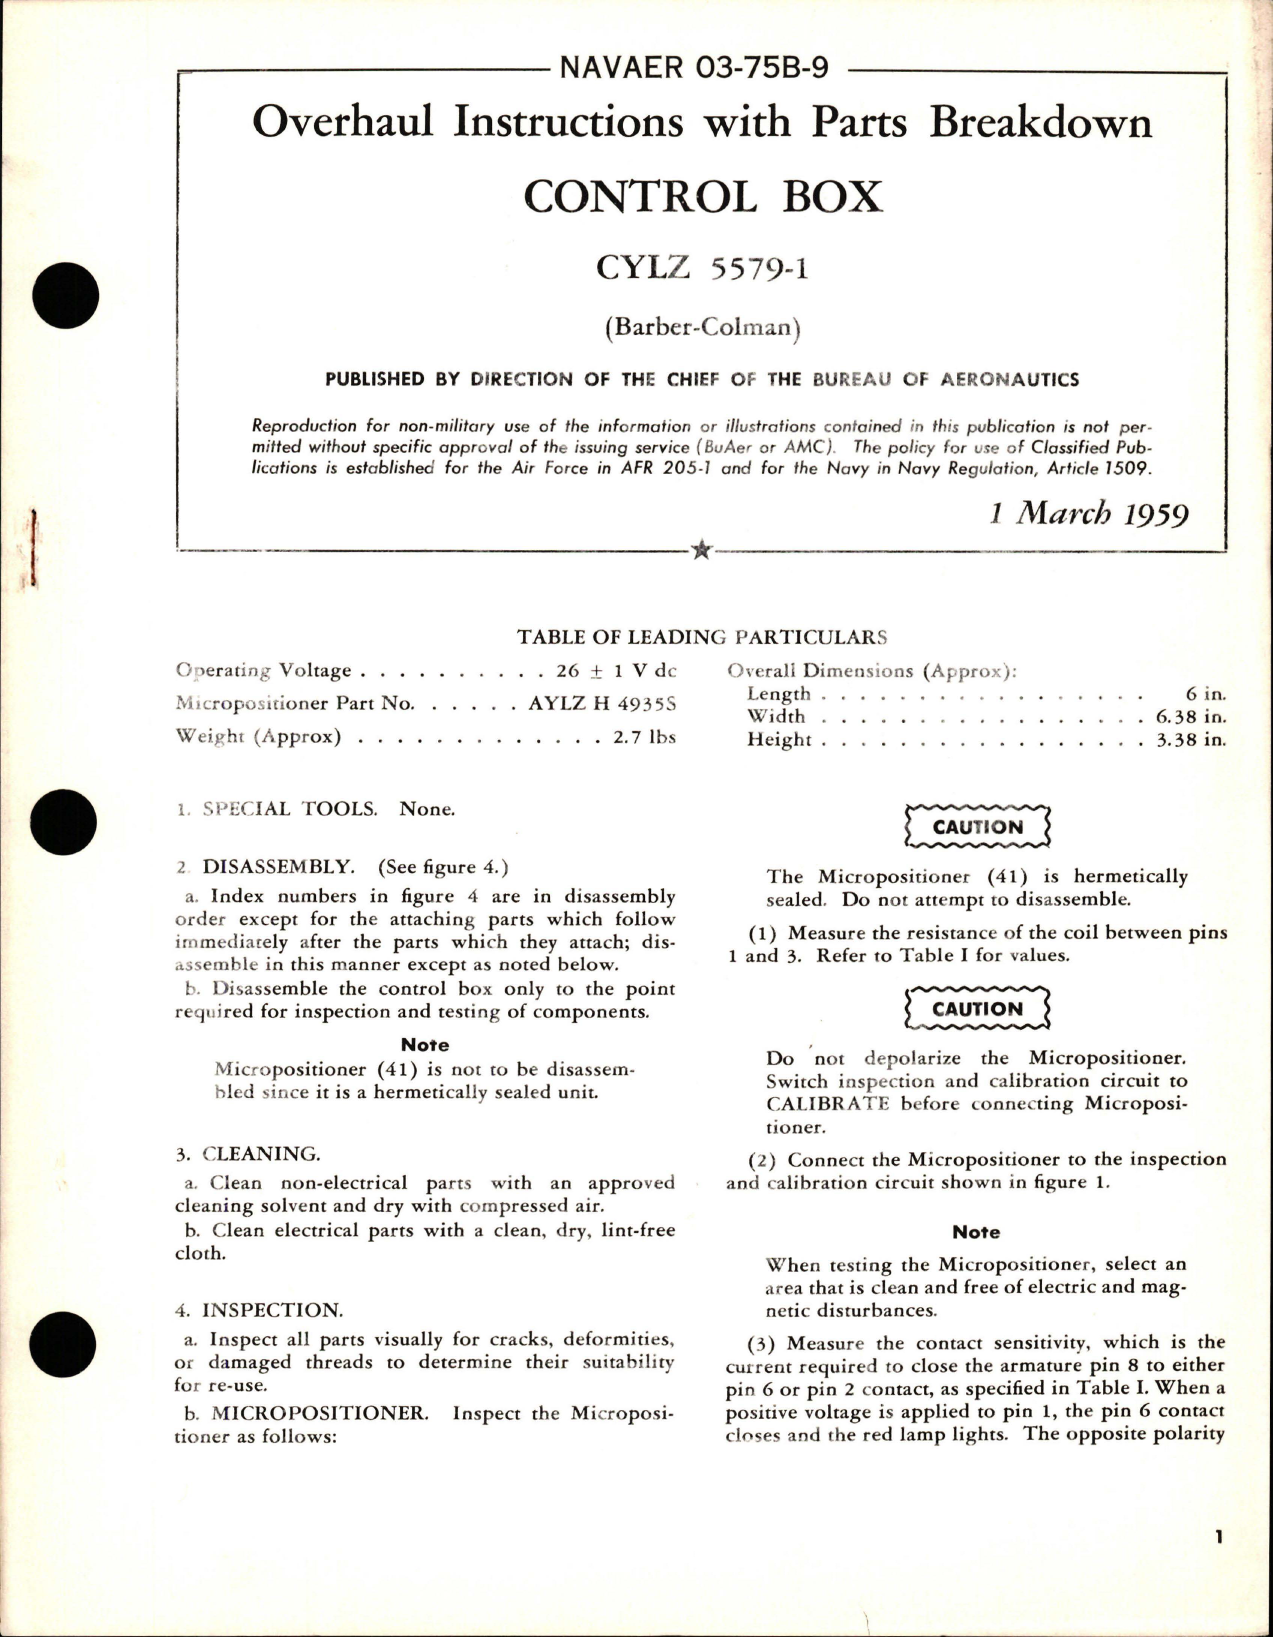 Sample page 1 from AirCorps Library document: Overhaul Instructions with Parts Breakdown for Control Box - CYLZ 5579-1